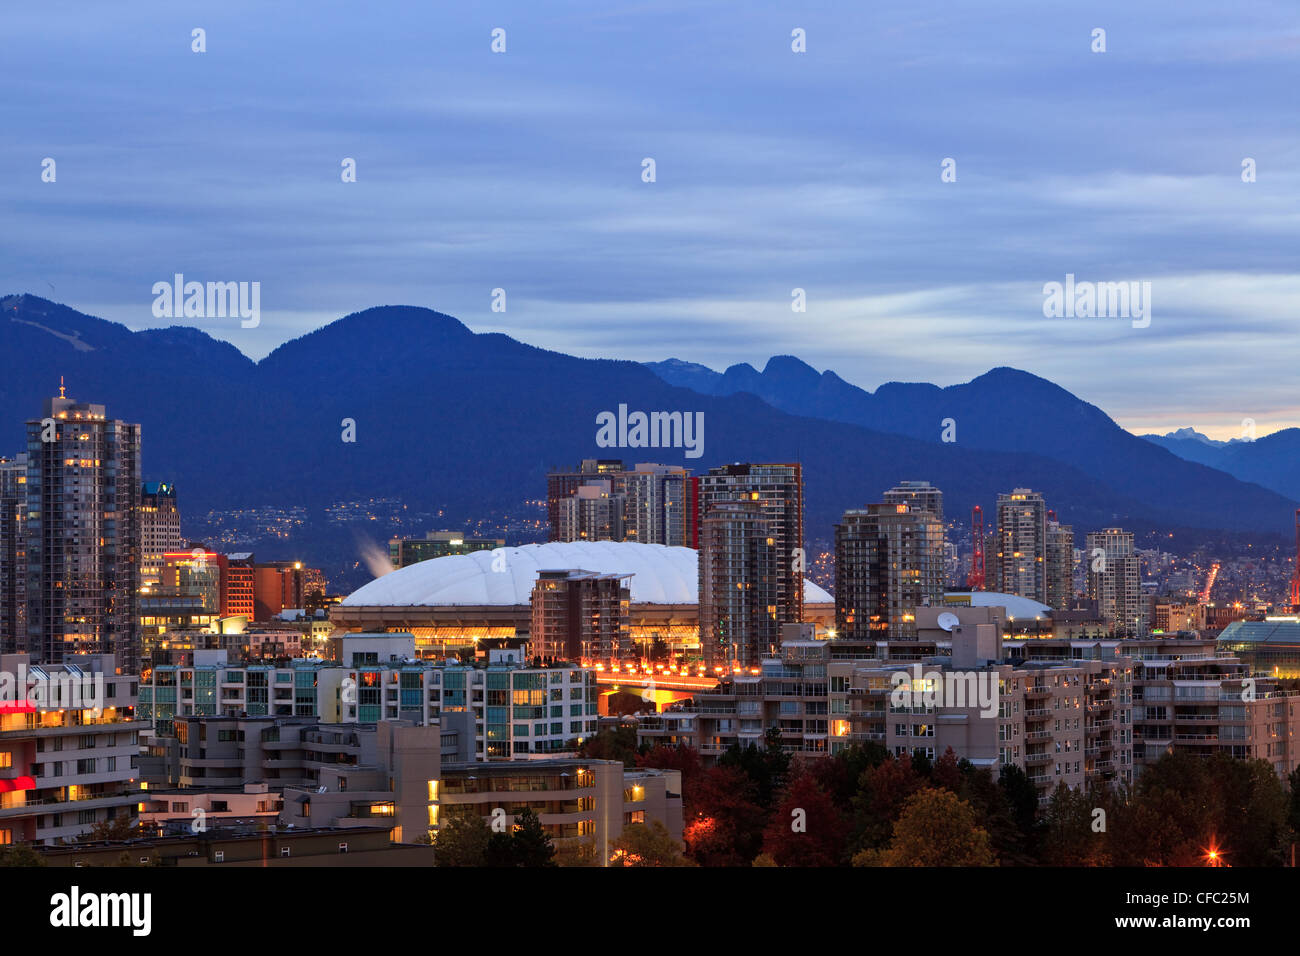 BC Place Stadium and the North Shore Mountains, venues for the 2010 Winter Olympic Games in Vancouver British Columbia Canada. Stock Photo